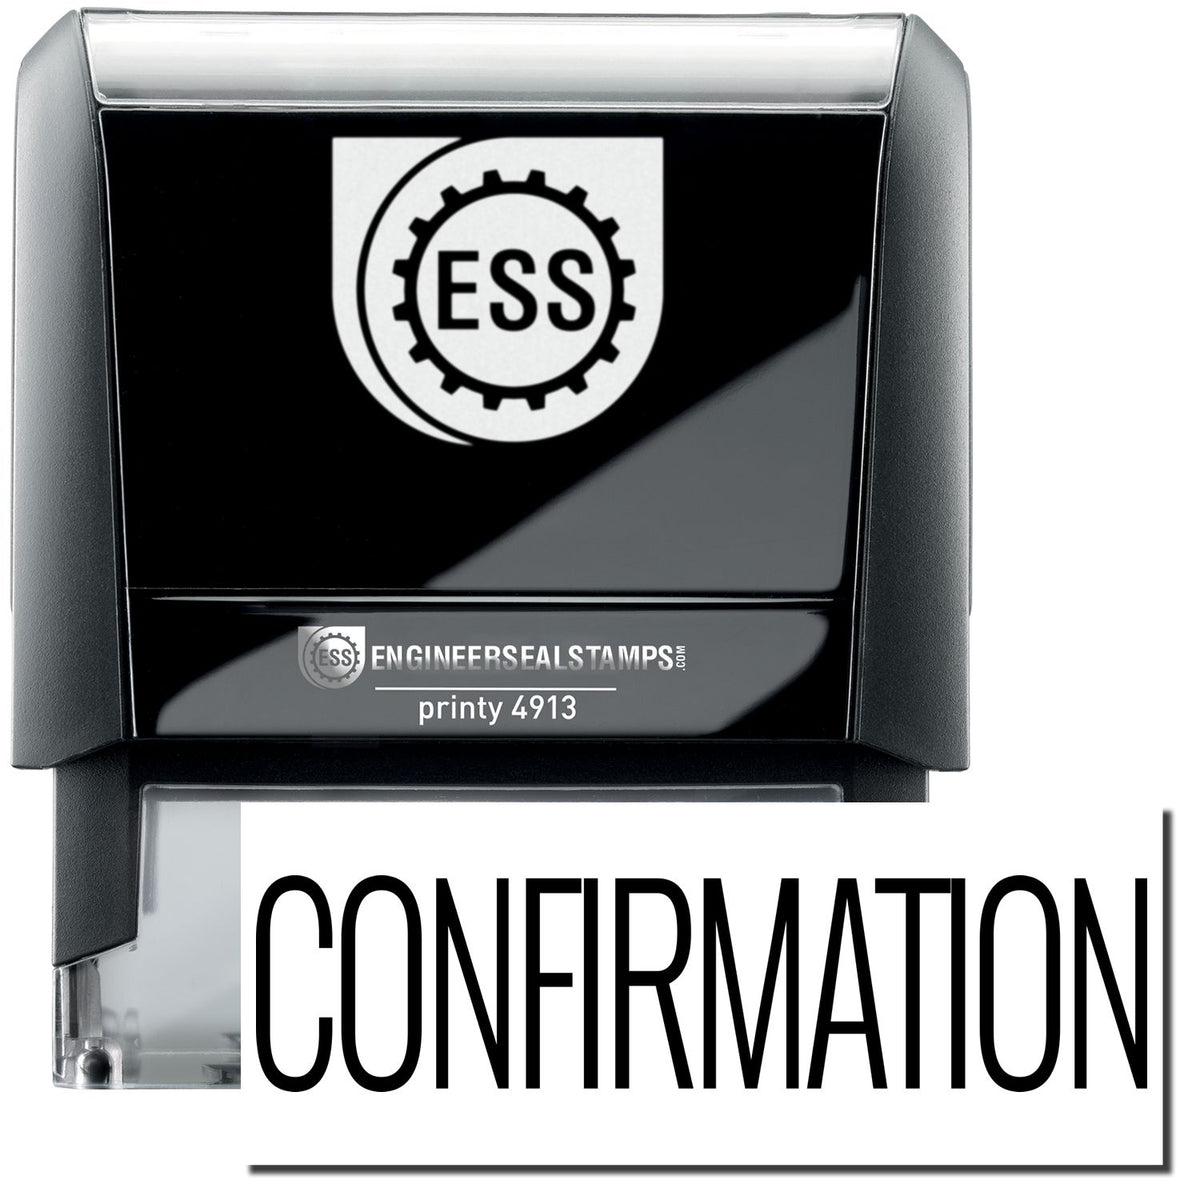 A self-inking stamp with a stamped image showing how the text &quot;CONFIRMATION&quot; in a large font is displayed by it after stamping.